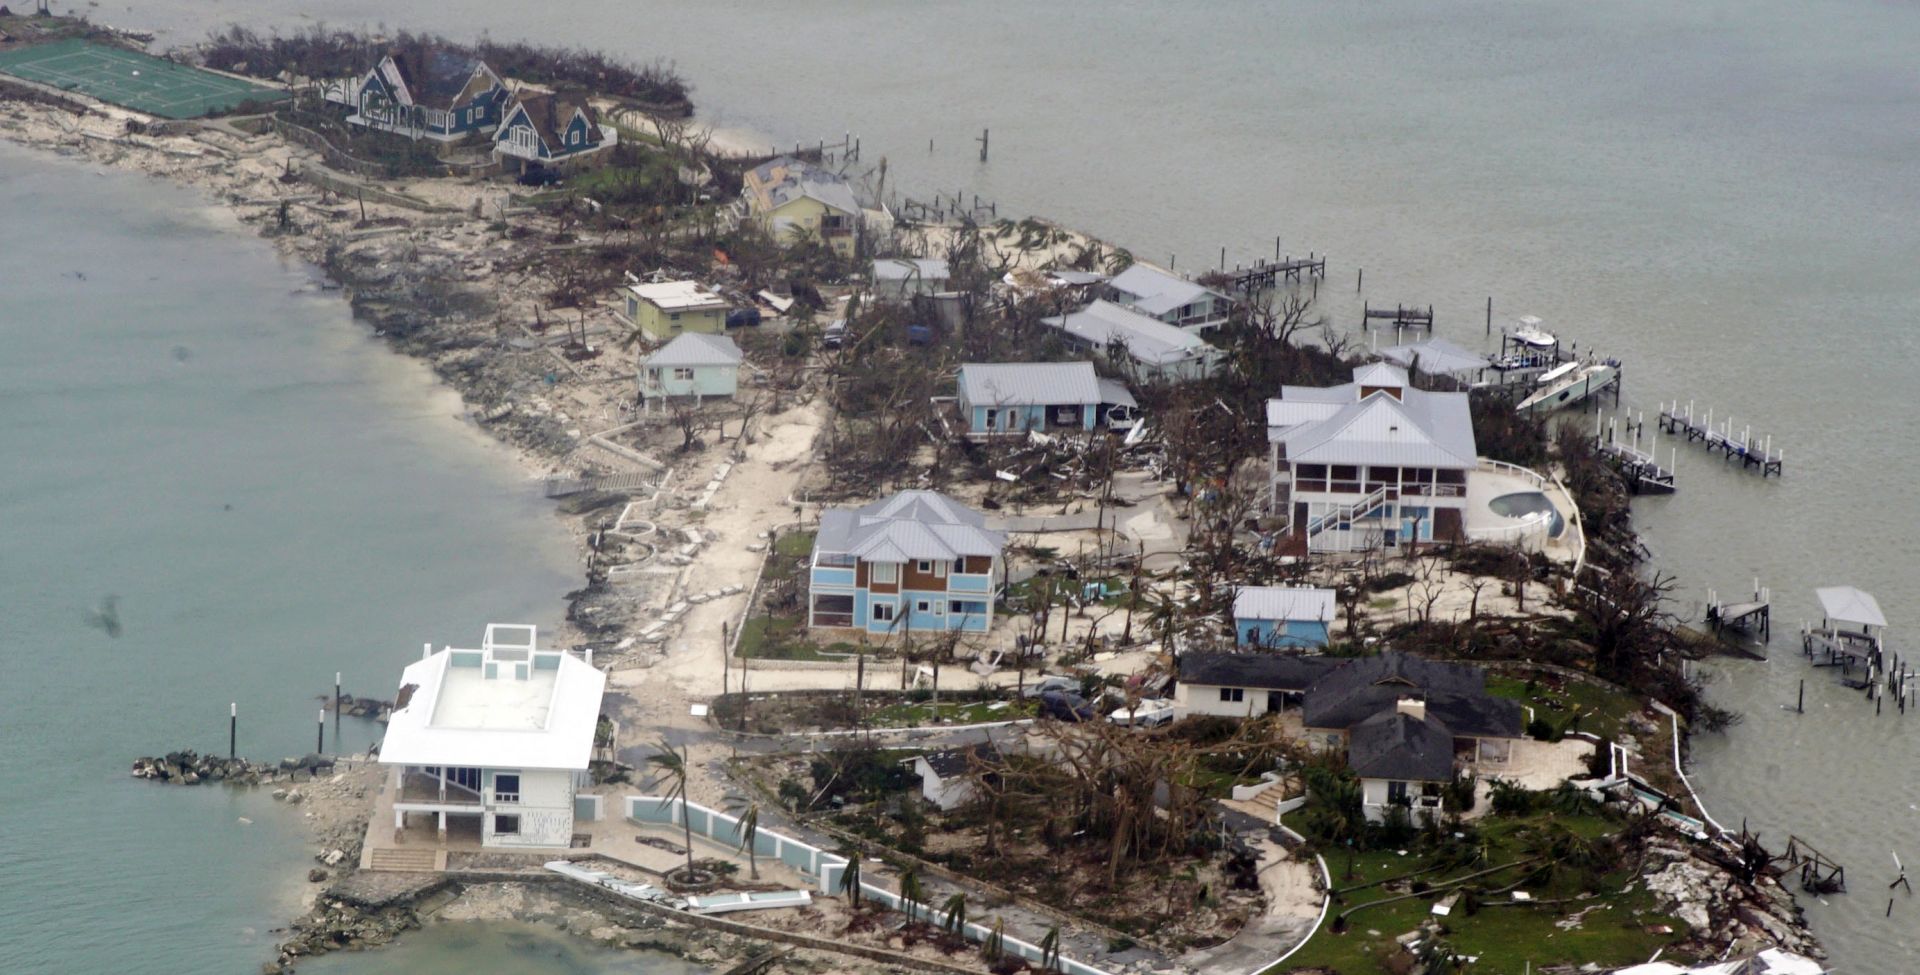 epa07815880 A handout photo made available by the US Coast Guard shows an aerial view of damaged structures in the Bahamas, 03 September 2019, seen from a Coast Guard Elizabeth City C-130 aircraft after Hurricane Dorian shifted north. Hurricane Dorian made landfall on 31 August.  EPA/PO2 ADAM STANTON/US COAST GUARD HANDOUT  HANDOUT EDITORIAL USE ONLY/NO SALES